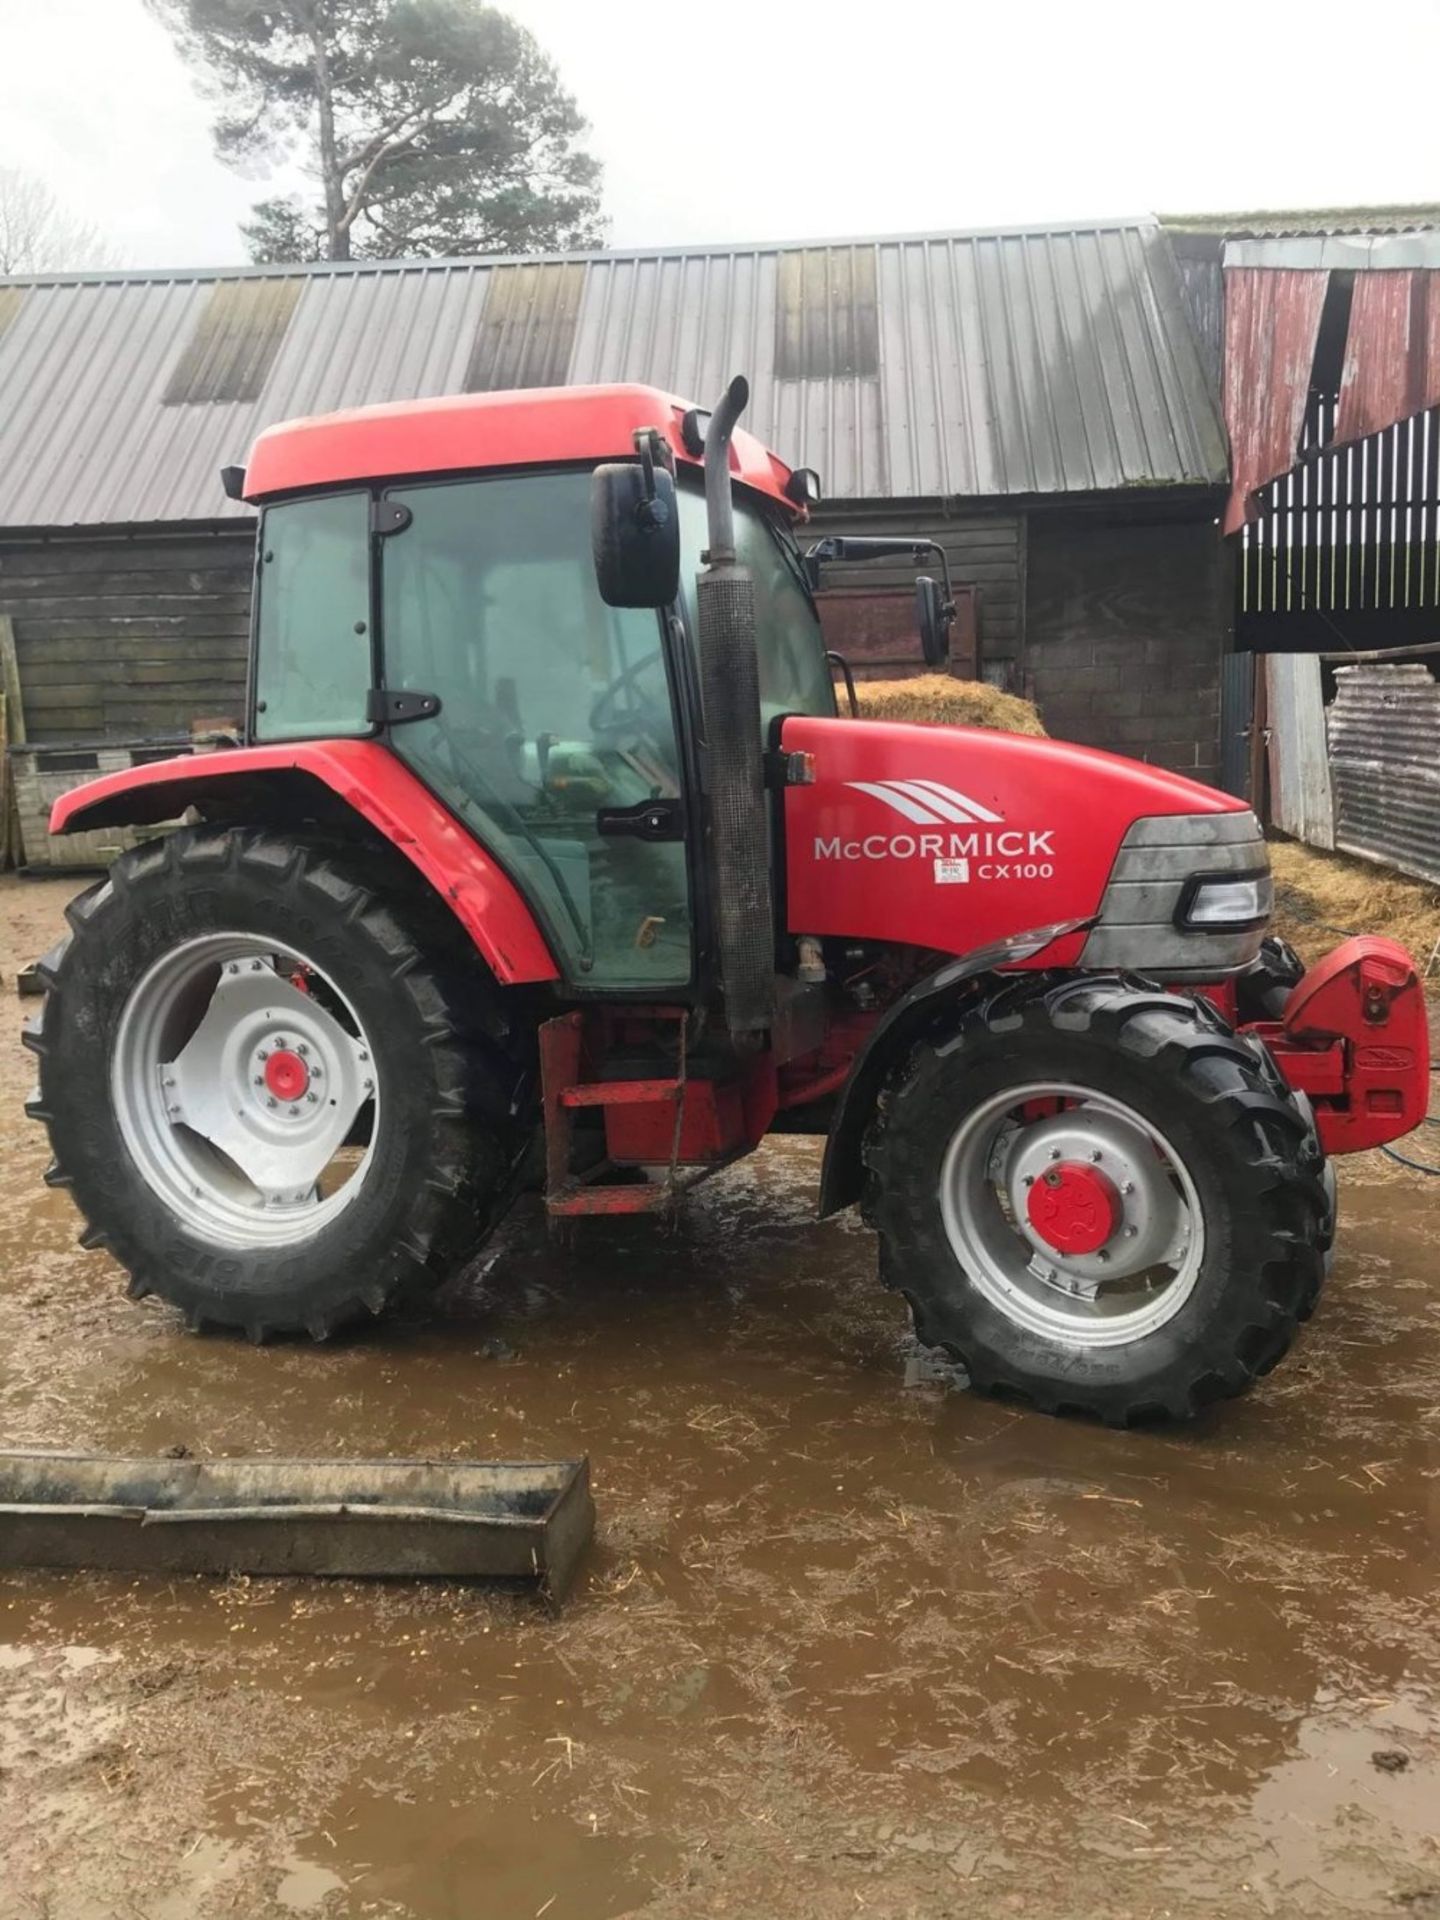 MCORMICK CX 100 4WD TRACTOR